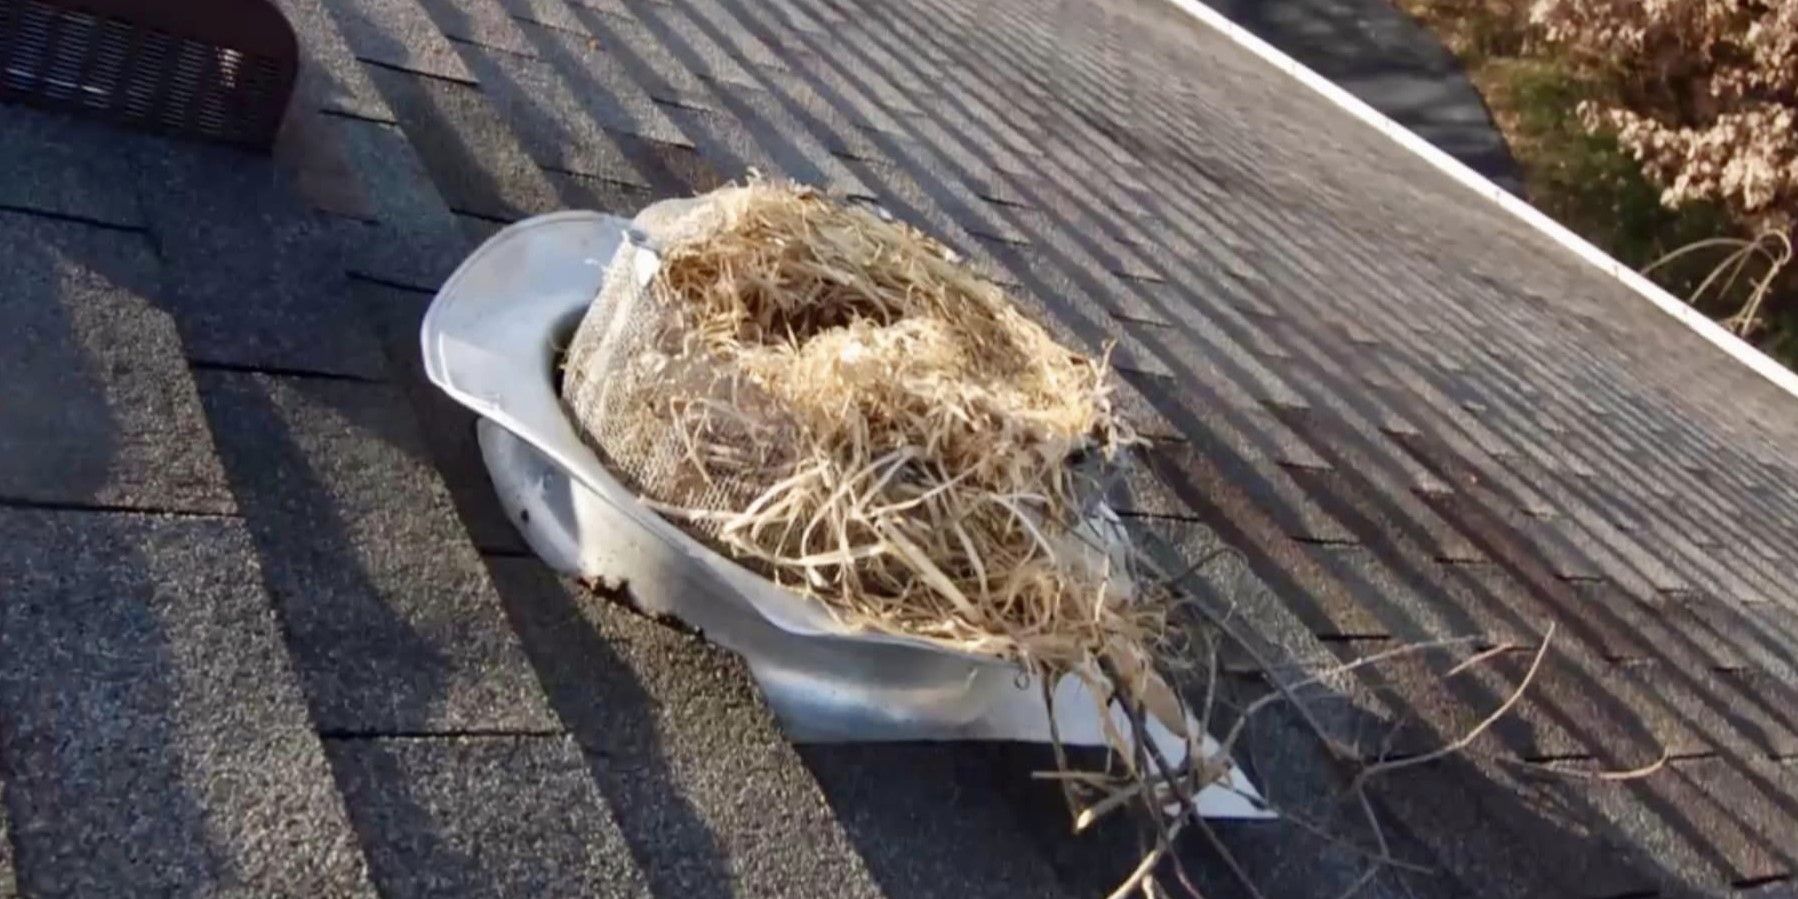 A circular roof vent guard with a large bird's nest blocking it.